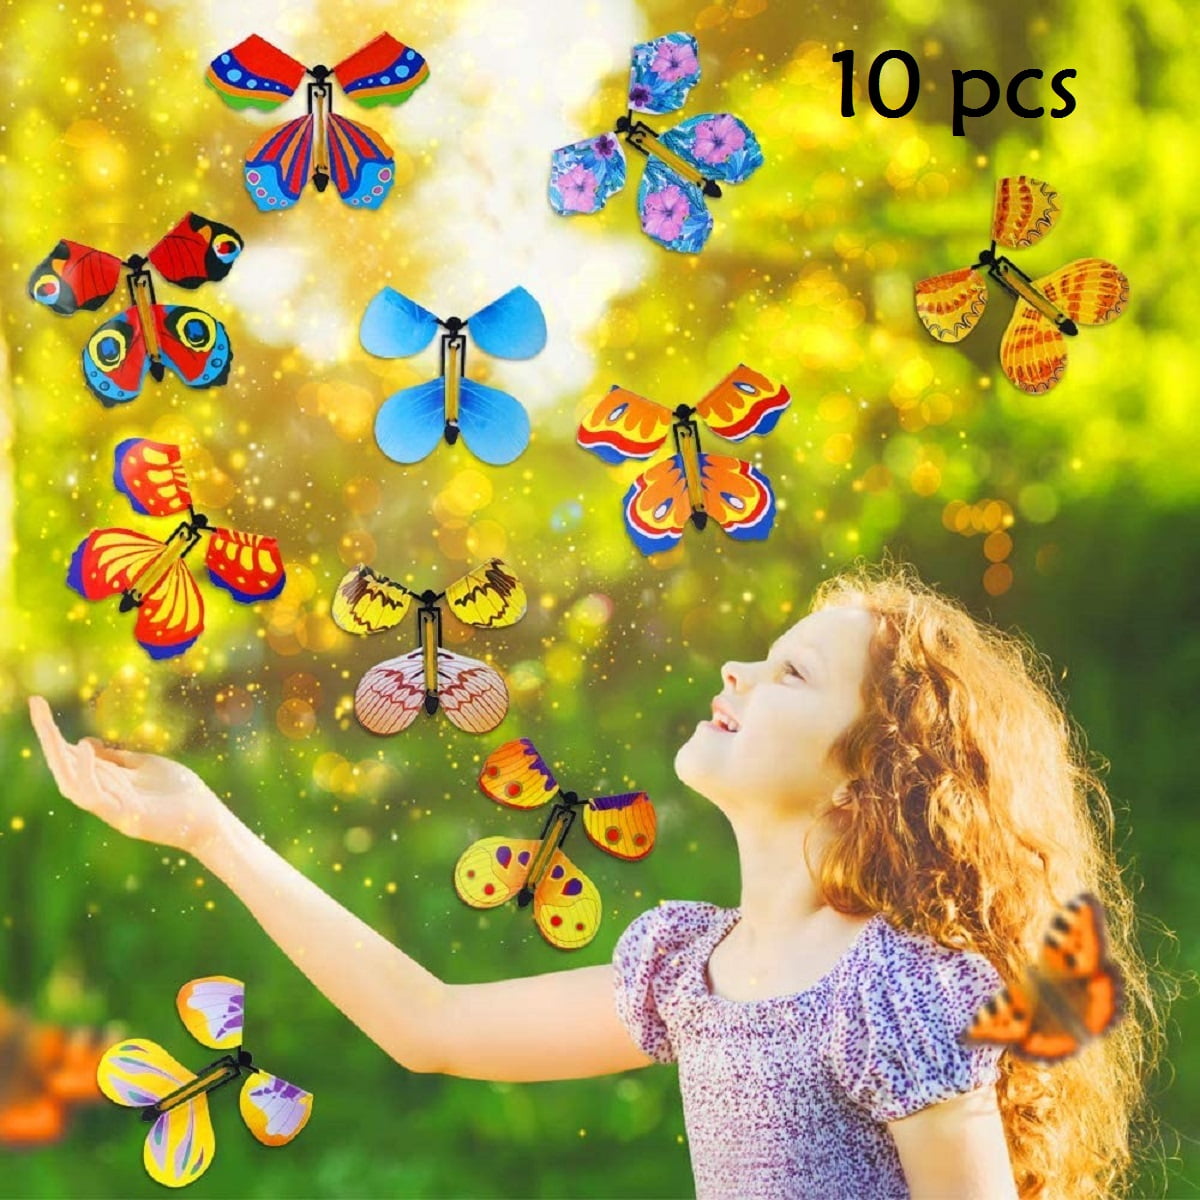 iDIMSON Magic Flying Butterfly Rubber Band Powered Wind up Butterfly Toy in Book or Card for Surprise Gift or Party Playing 9pcs 